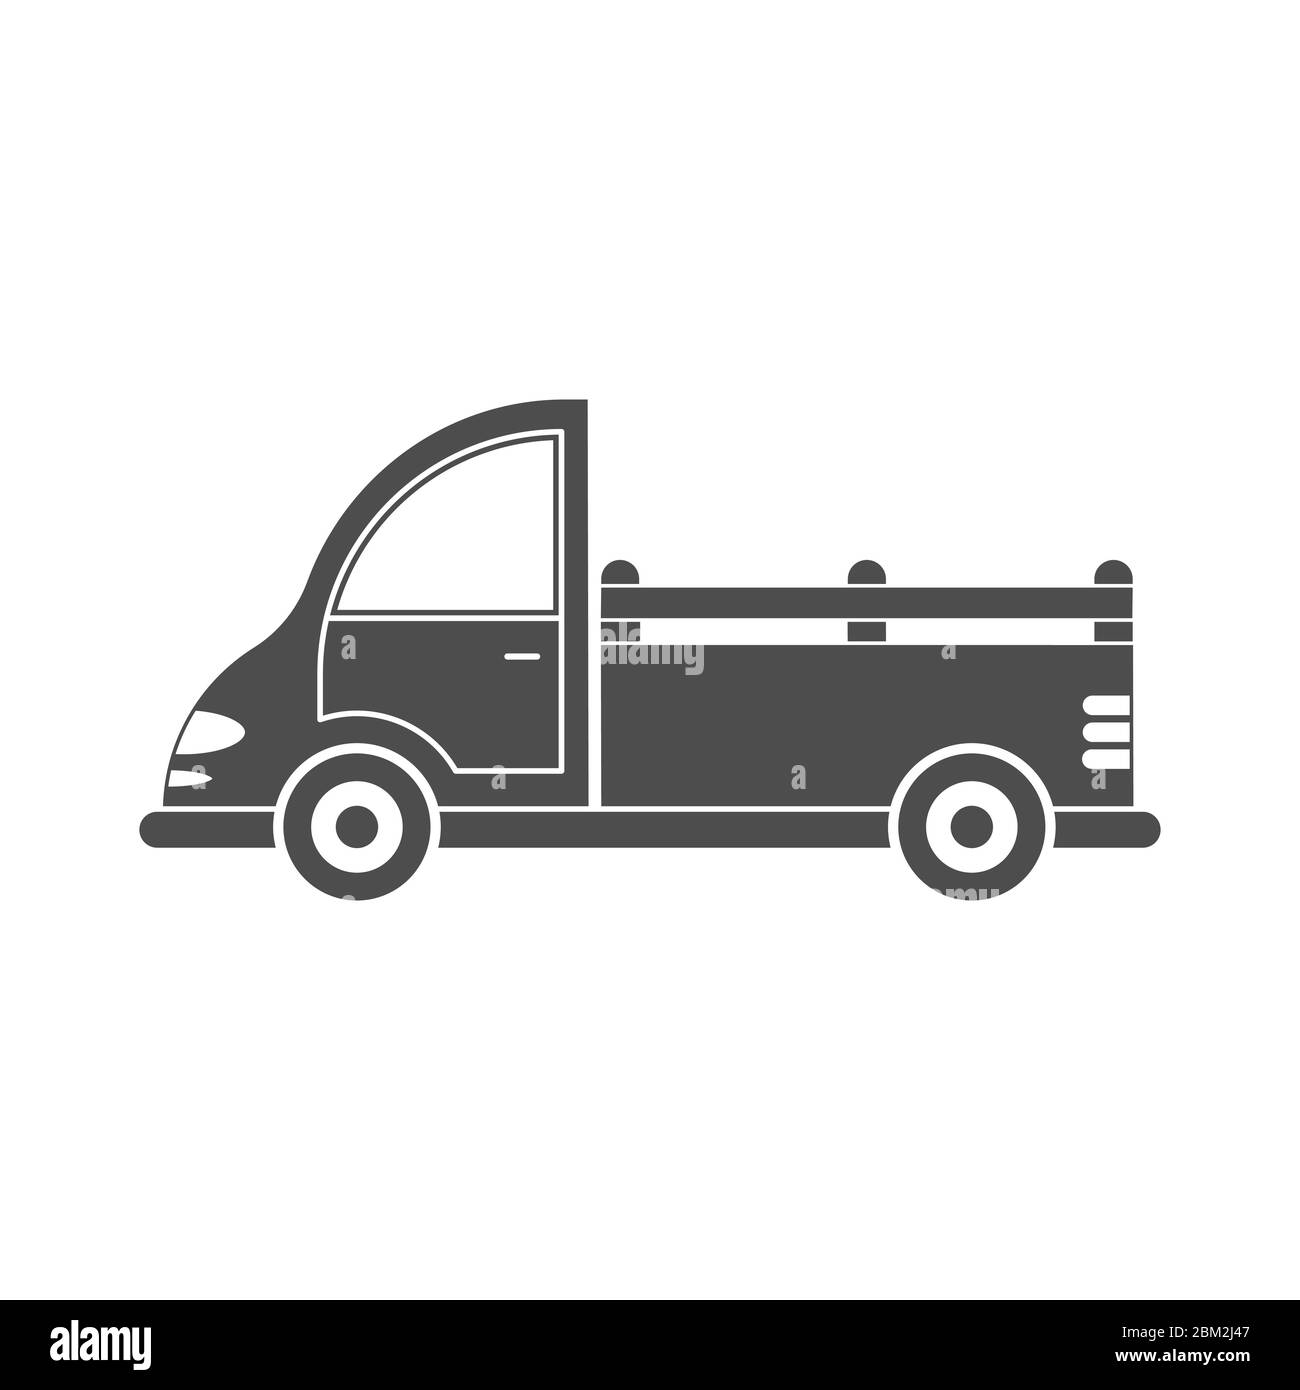 Vector icon of a car or commercial van. Simple design, filled silhouette isolated on white background. Design for websites, and apps Stock Vector